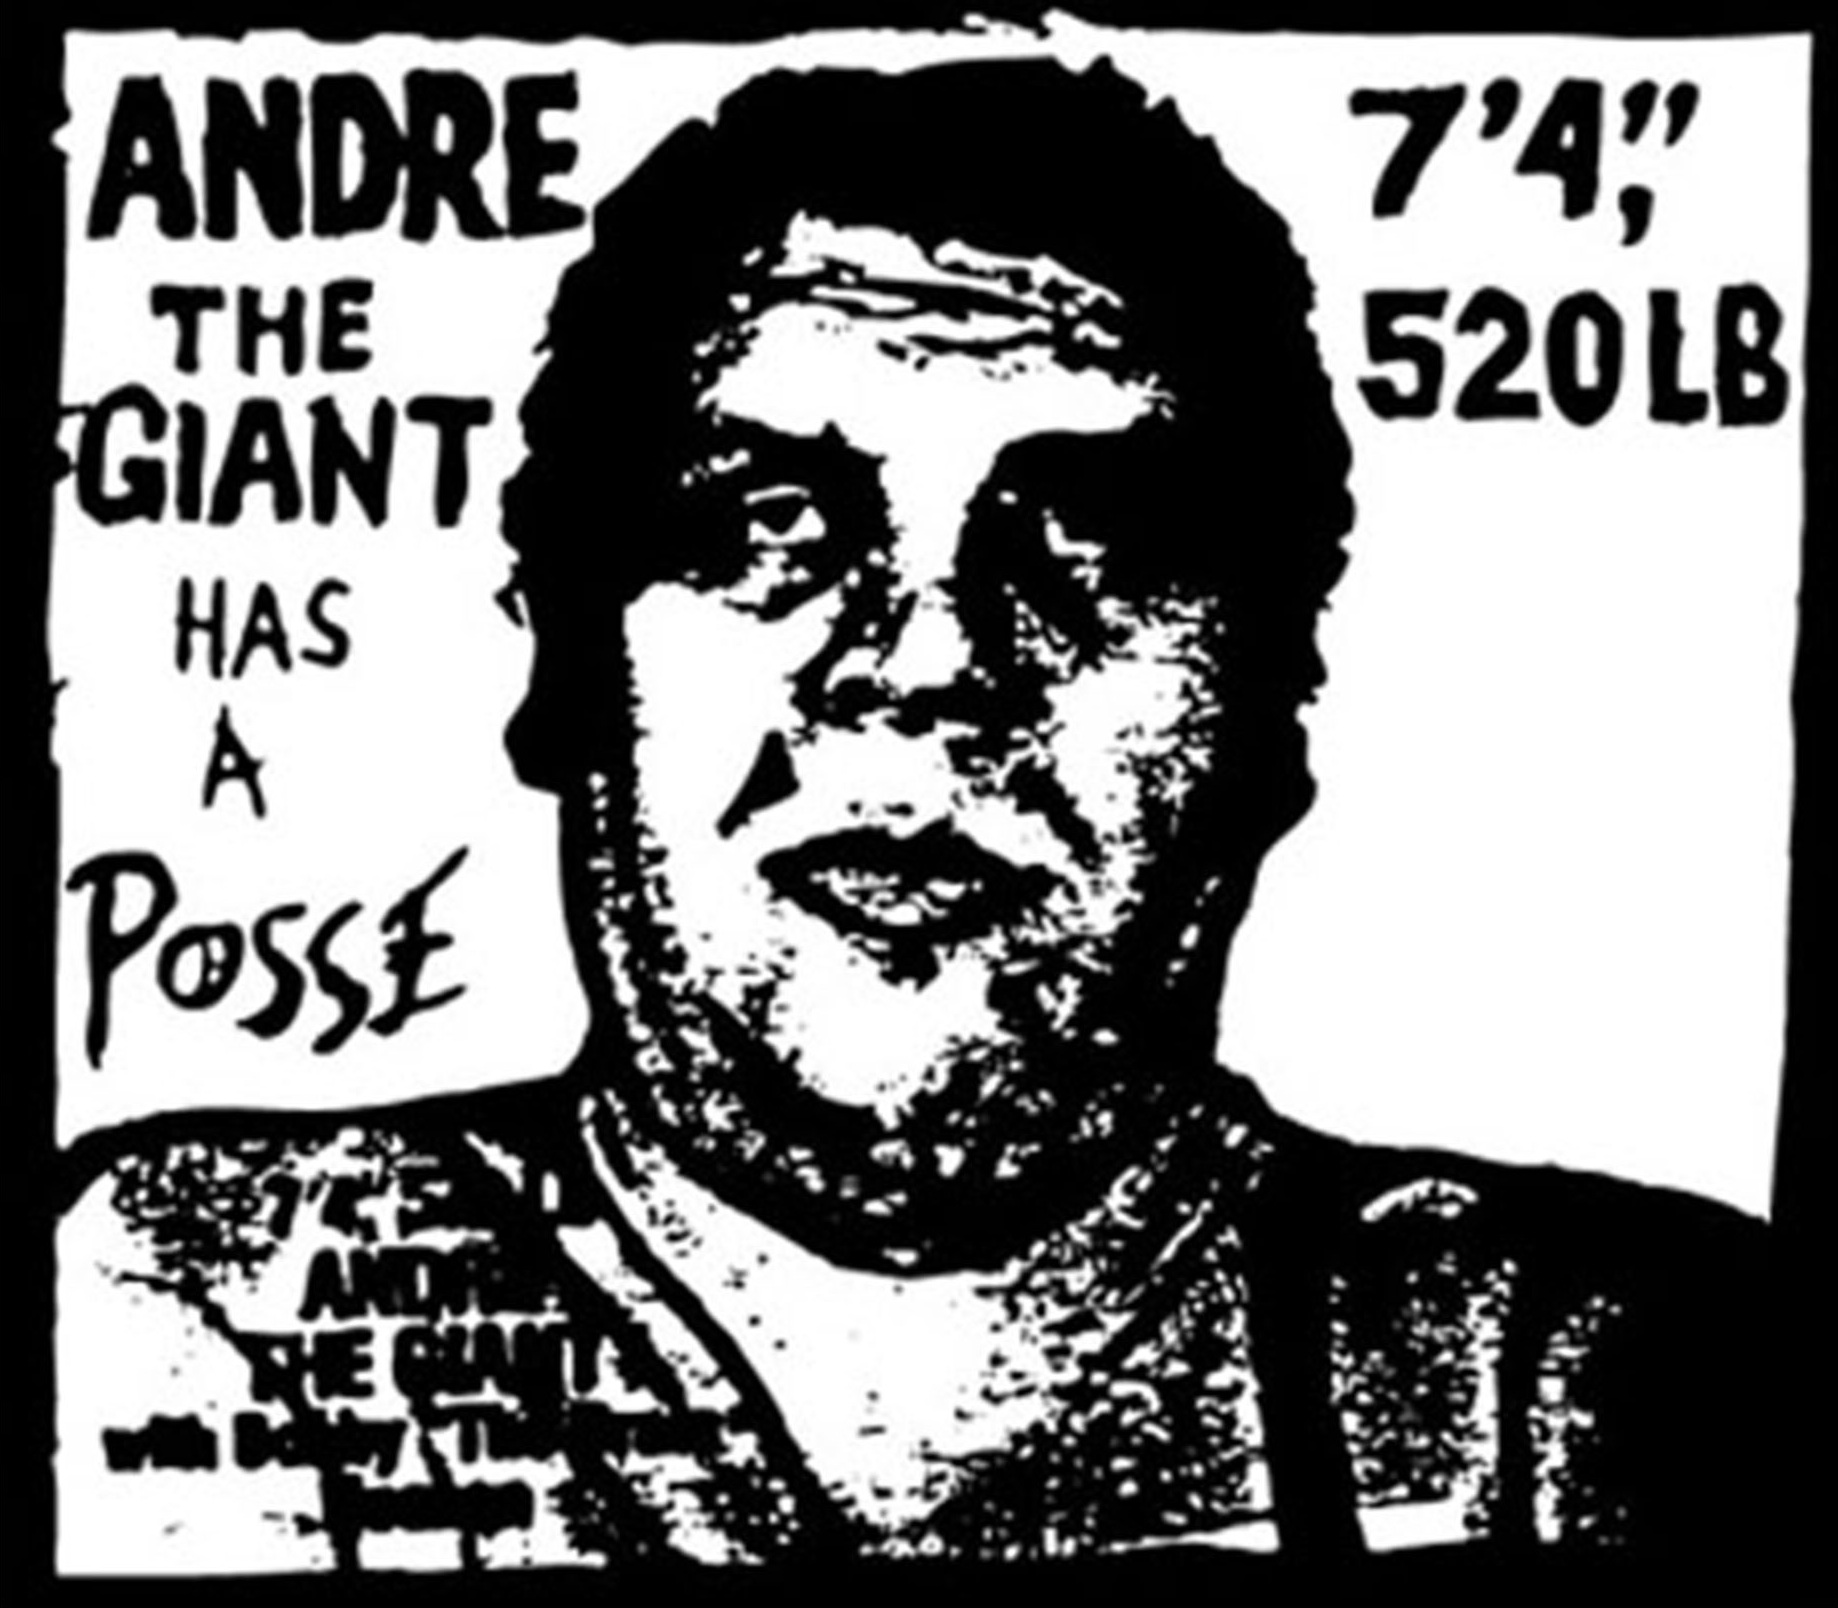 andre-the-giant-has-a-posse.jpg